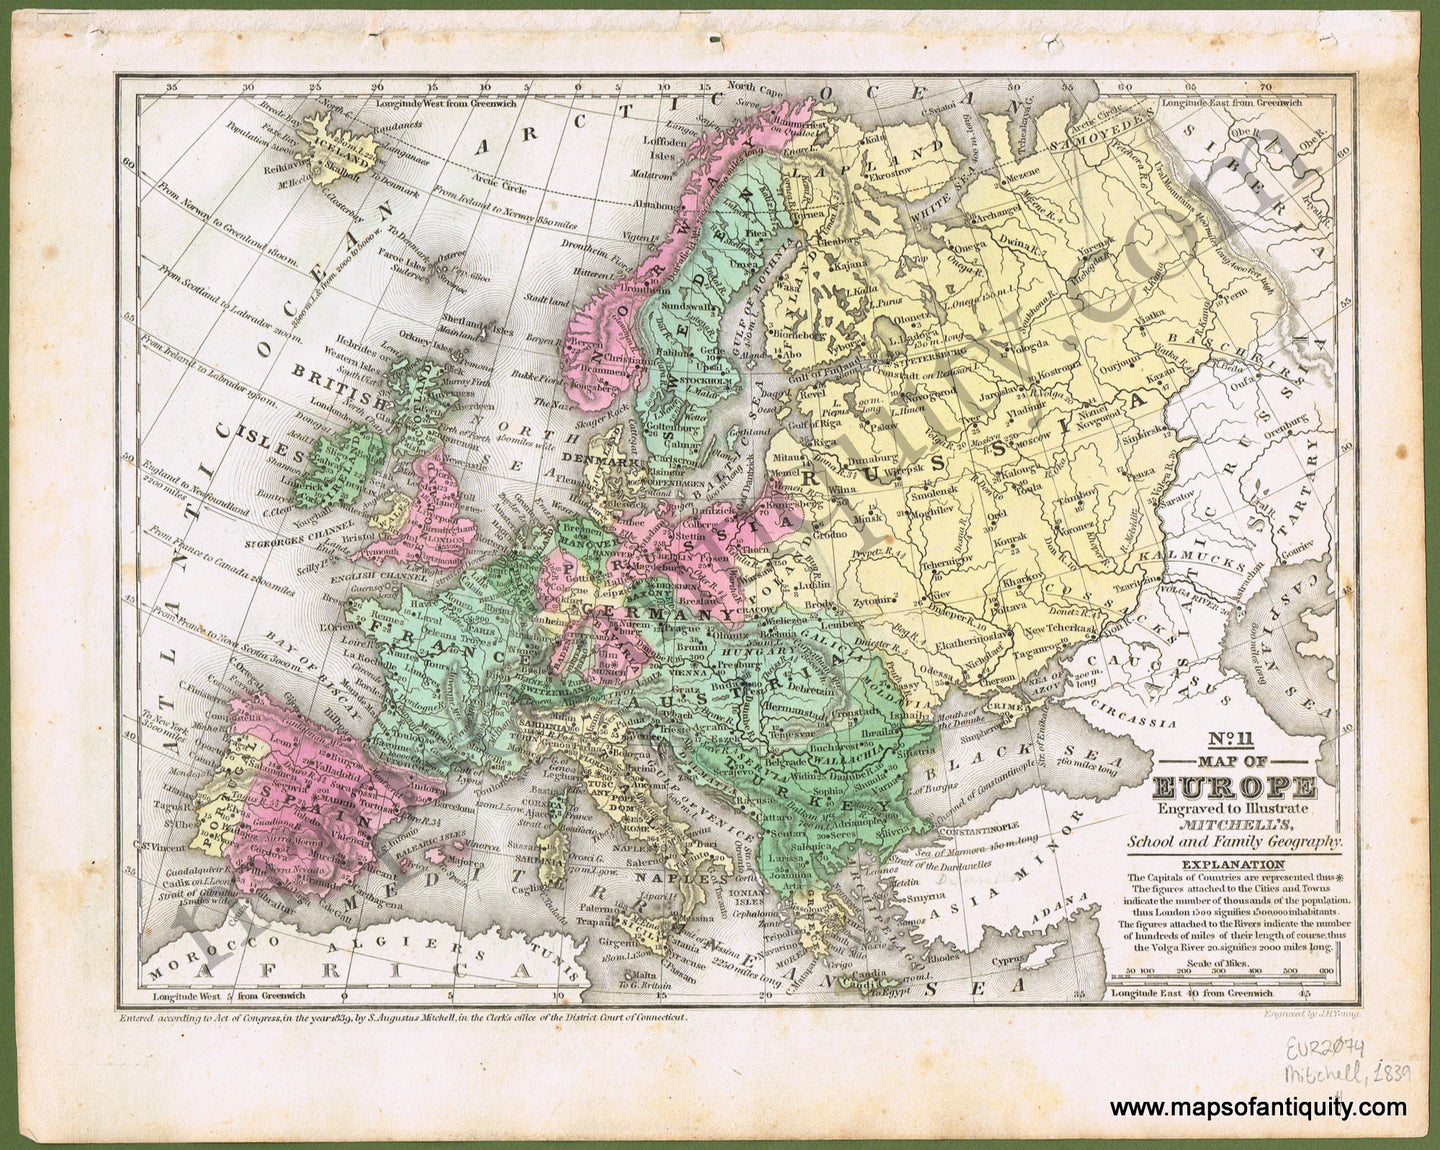 Antique-Hand-Colored-Map-No.-11-Map-of-Europe-Europe-Europe-General-1839-Mitchell-Maps-Of-Antiquity